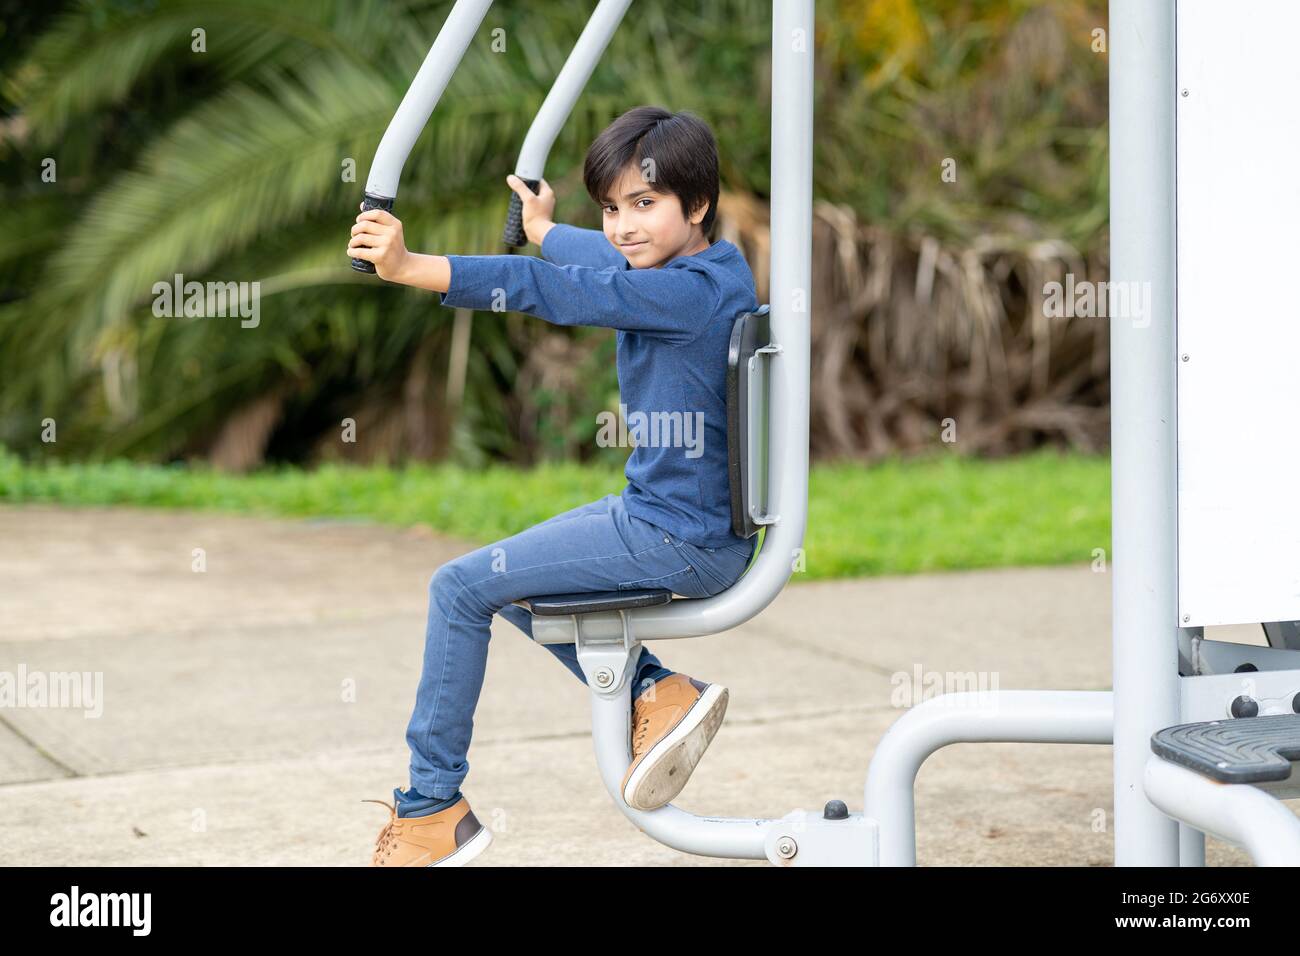 Healthy kid doing exercise on gym equipment at park. Fitness concept. Active Young boy. Smart person at gym. Stock Photo